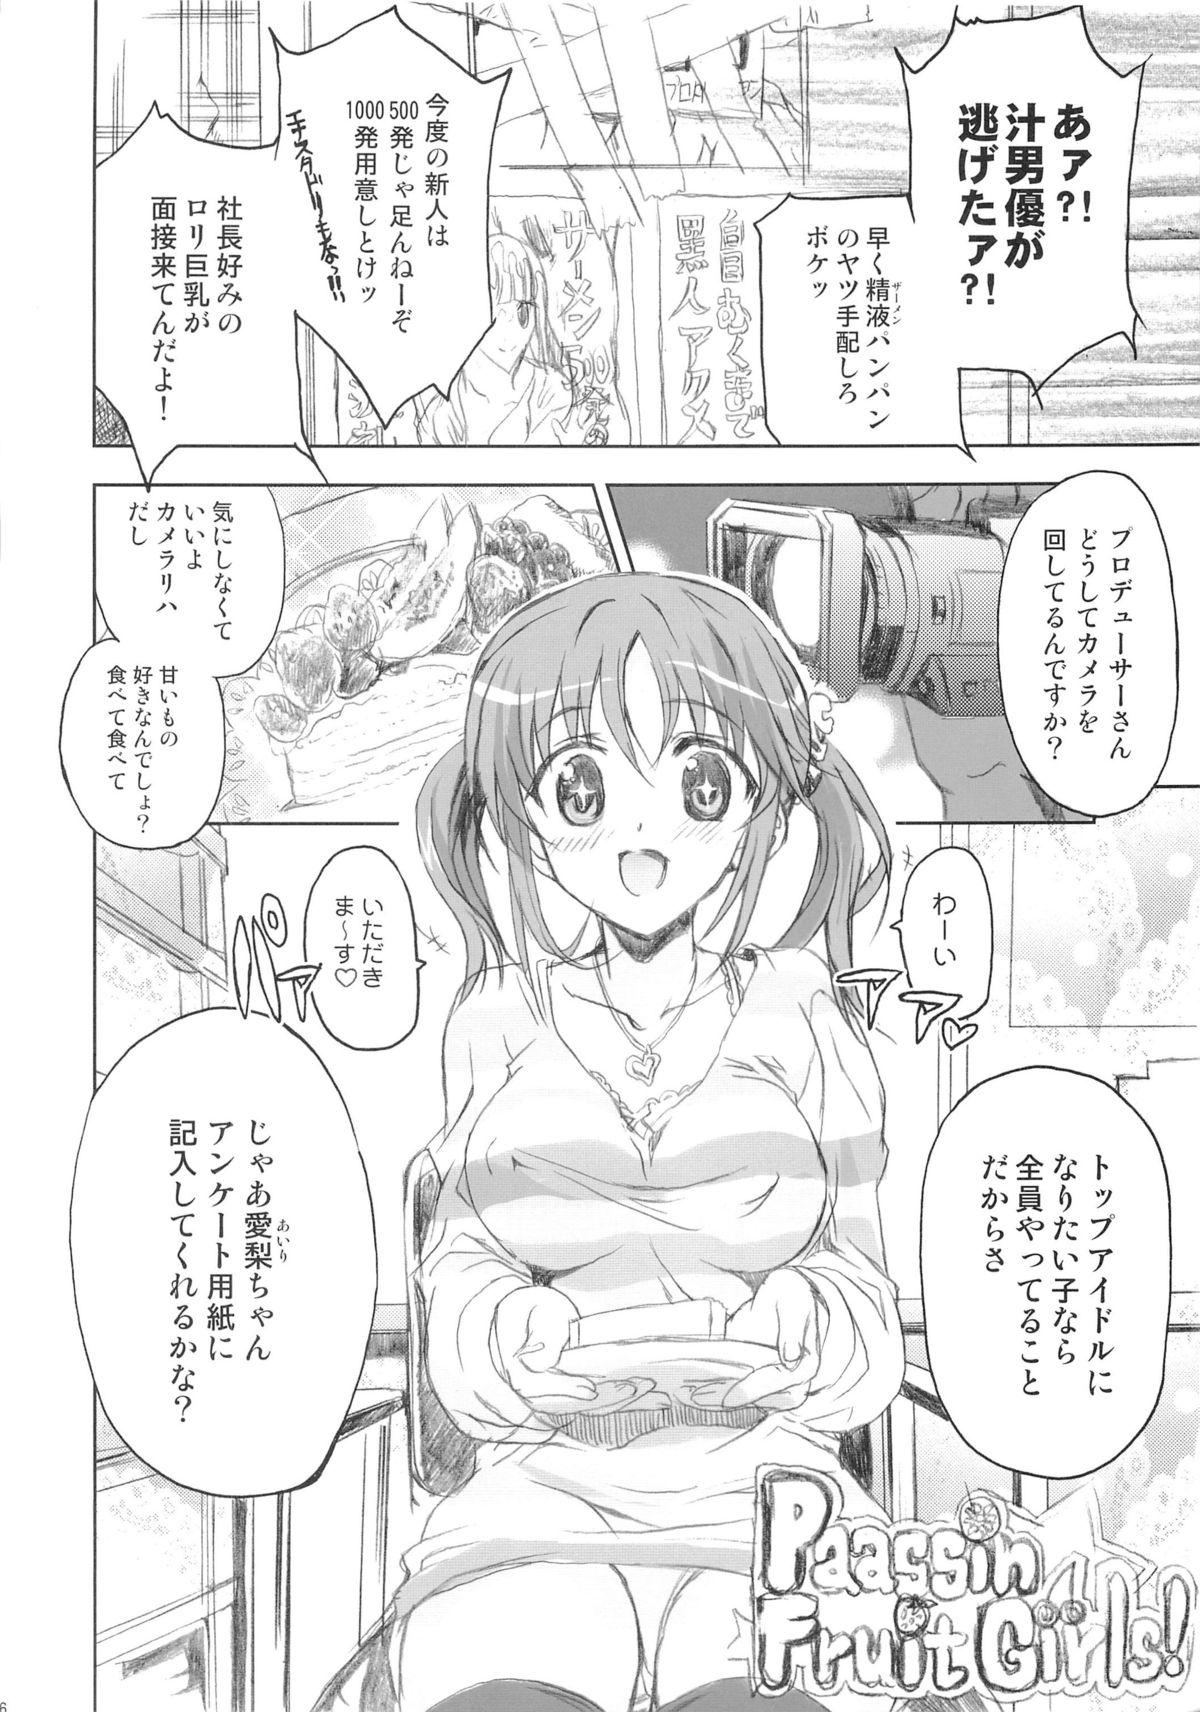 Egypt PASSION FRUITS GIRLS #1 "Totoki Airi" - The idolmaster Sixtynine - Page 5